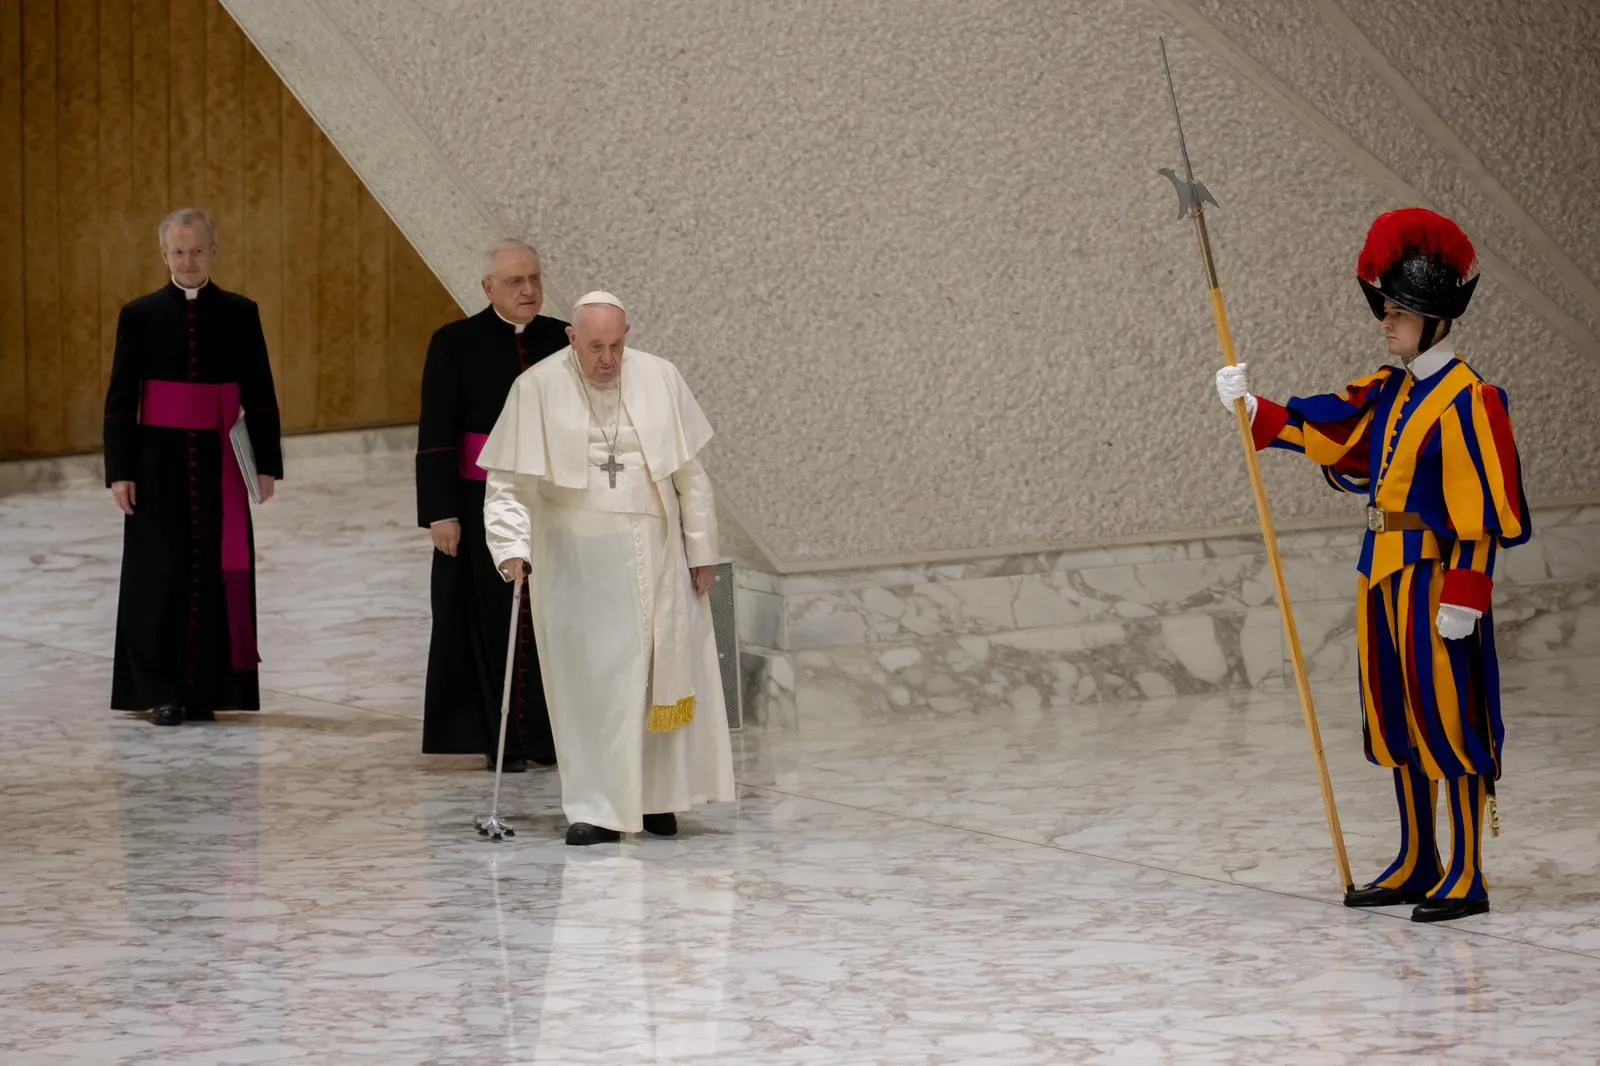 Pope Francis arrived at Paul VI Hall using a cane to walk on Jan. 18, 2023. Daniel Ibanez/CNA